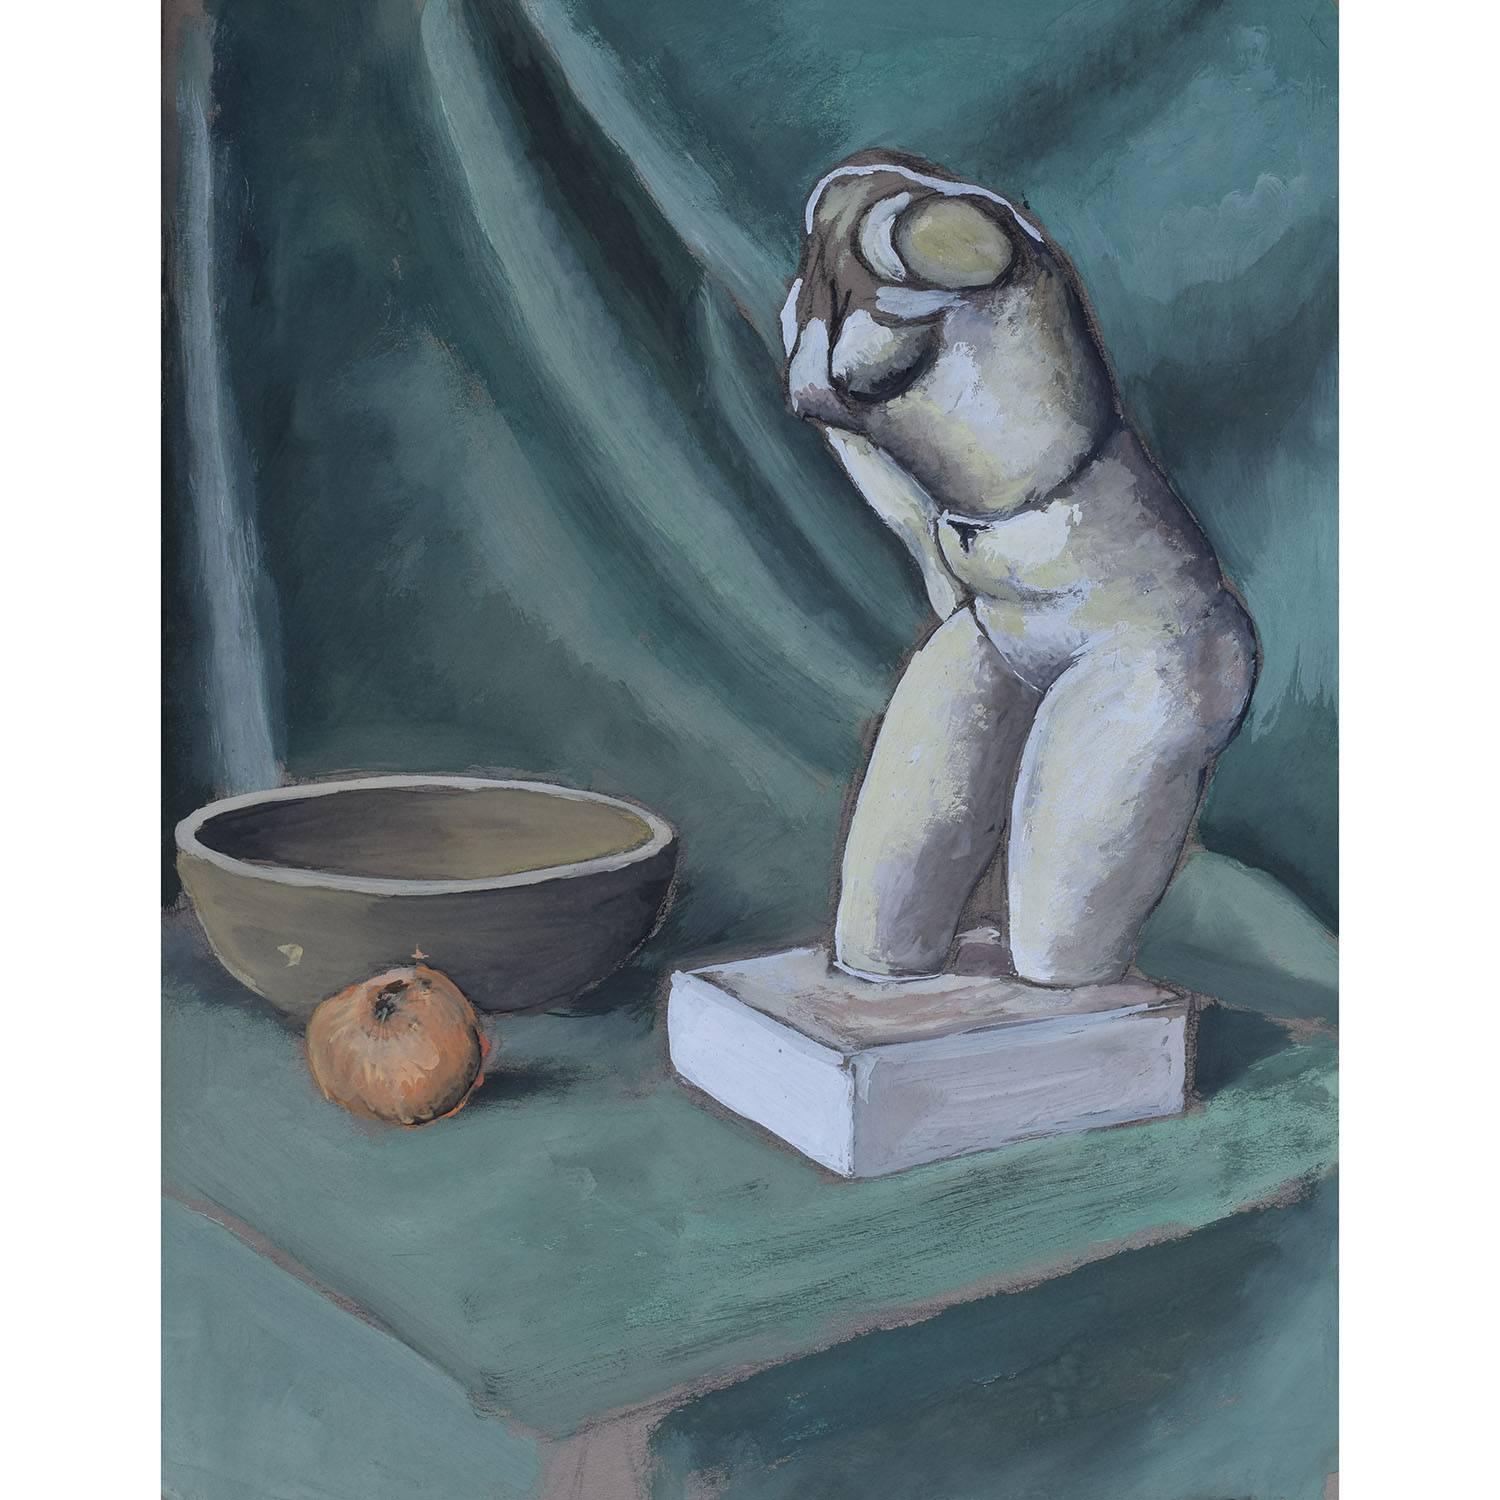 To see our other Modern British Art, scroll down to "More from this Seller" and below it click on "See all from this Seller" - or send us a message if you cannot find the artist you want.

Hilary Hennes (1919-?)
British
Still Life with torso c.